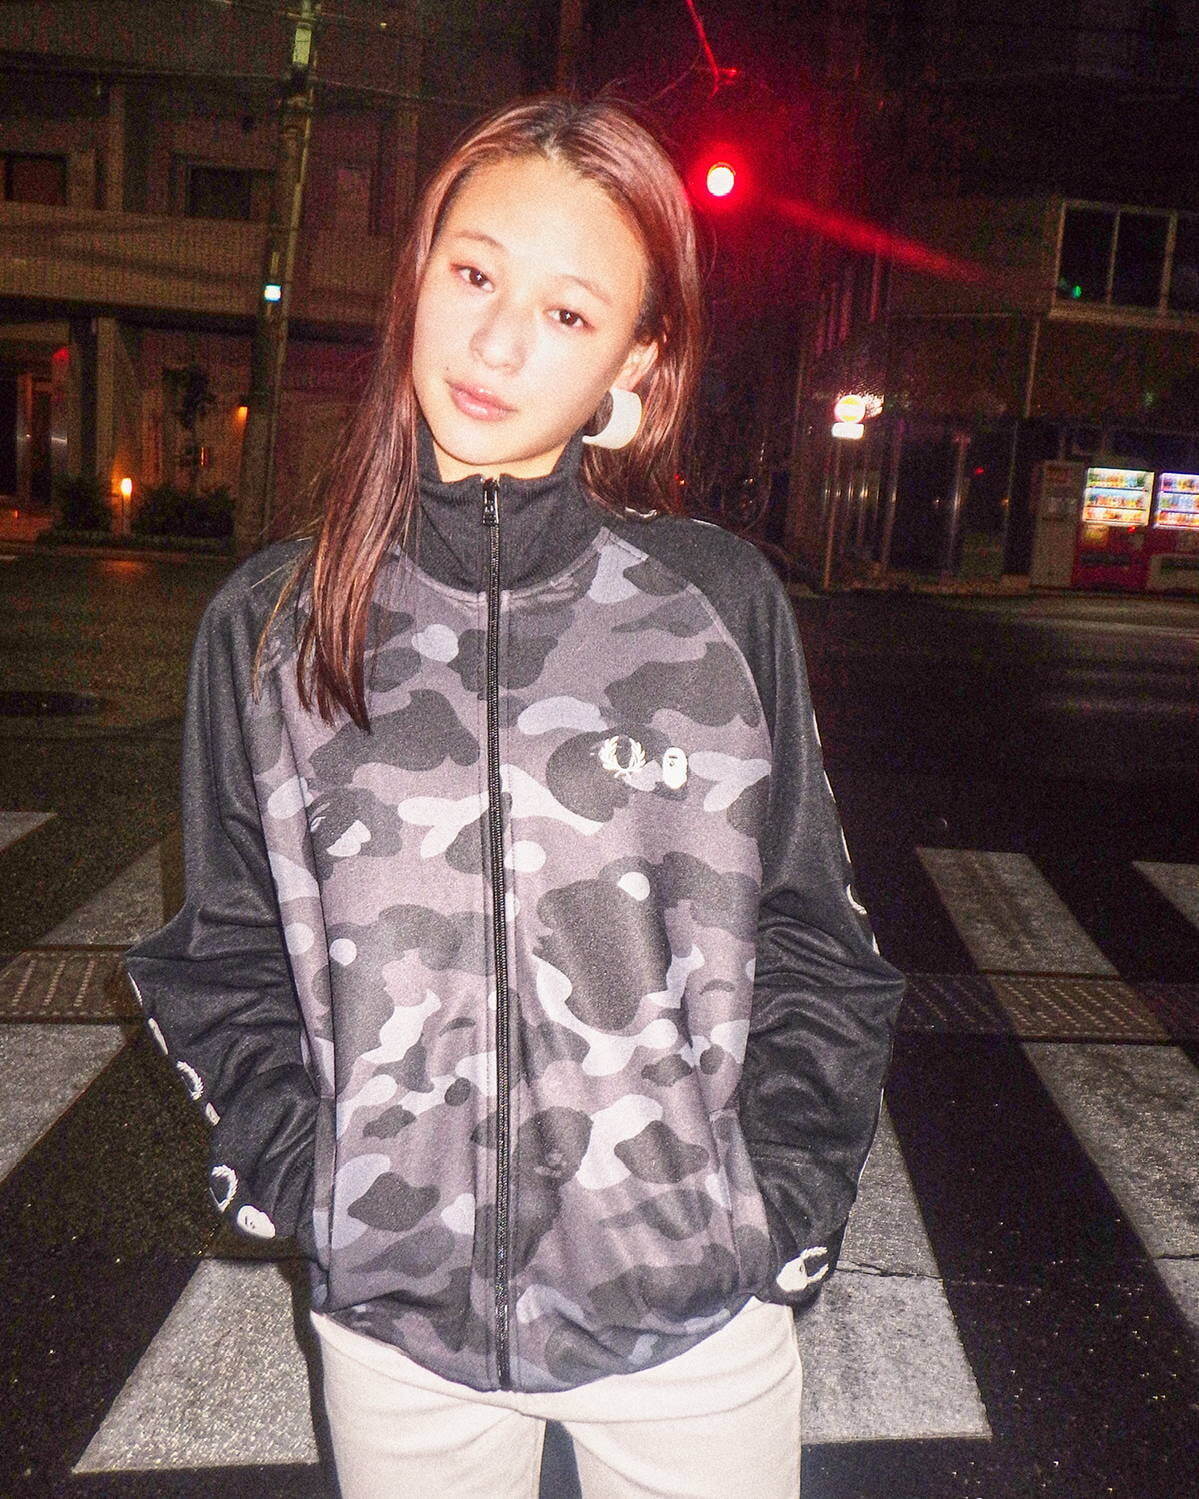 BAPE X FRED PERRY COLOR CAMO TRACK JACKET 36,300円